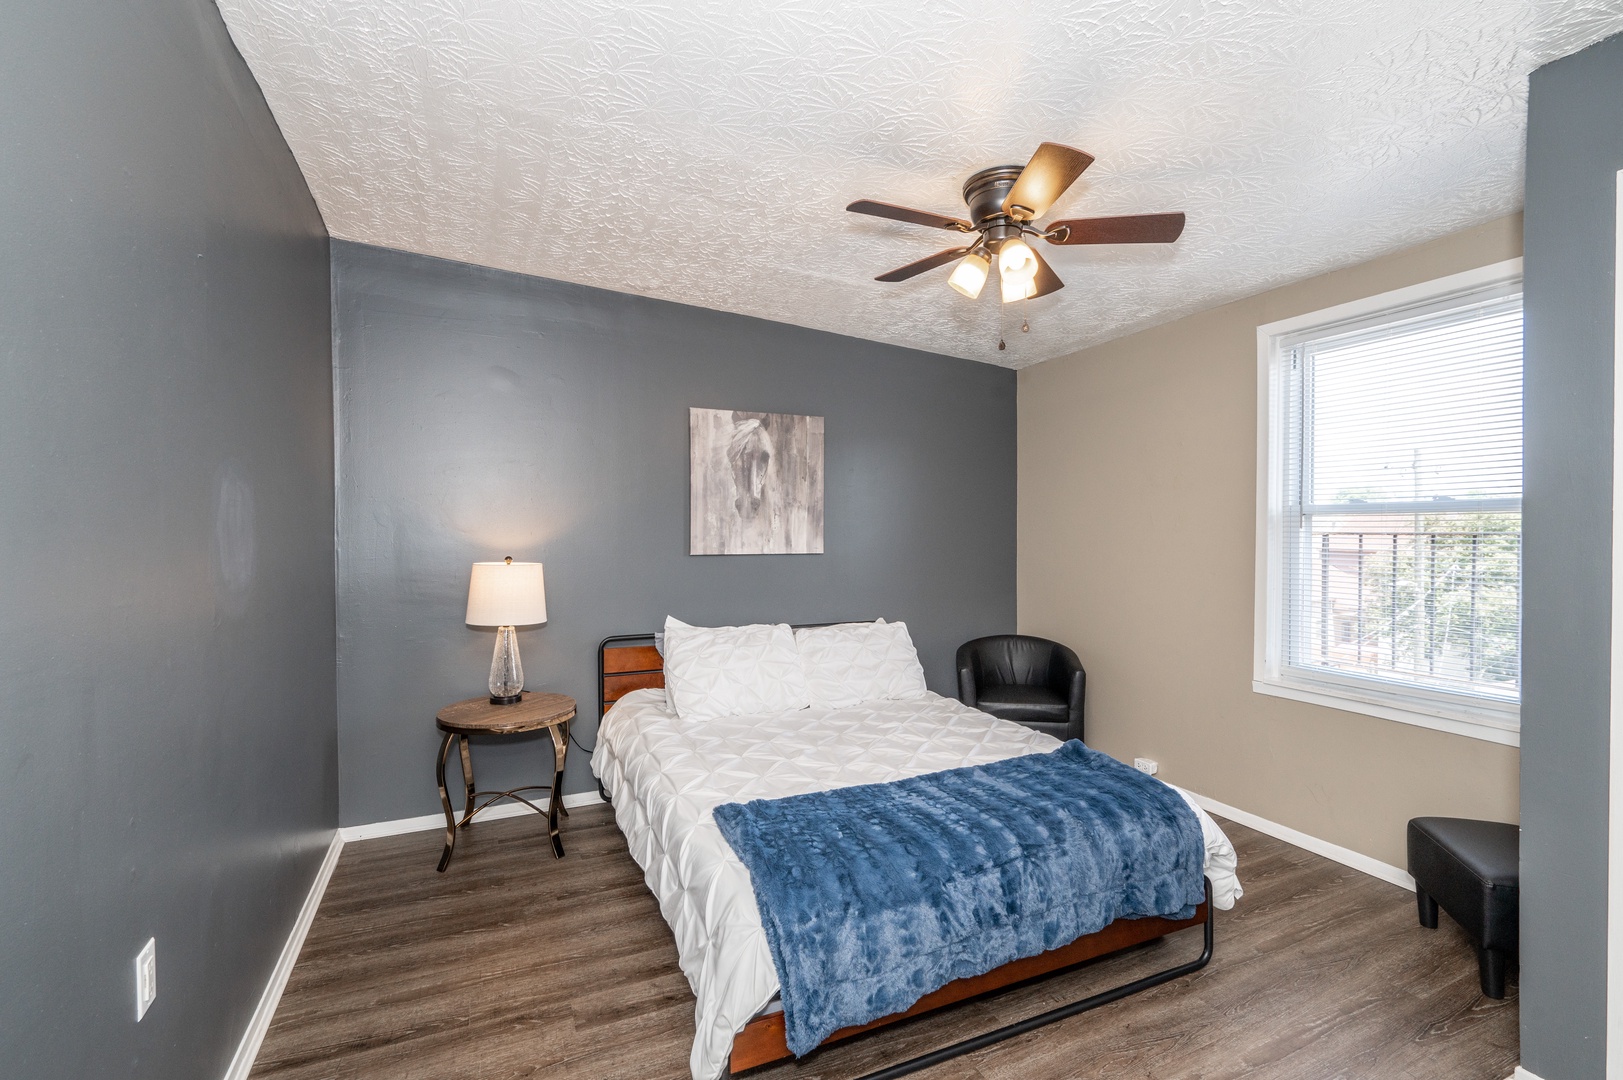 The spacious primary bedroom offers a queen bed & ceiling fan